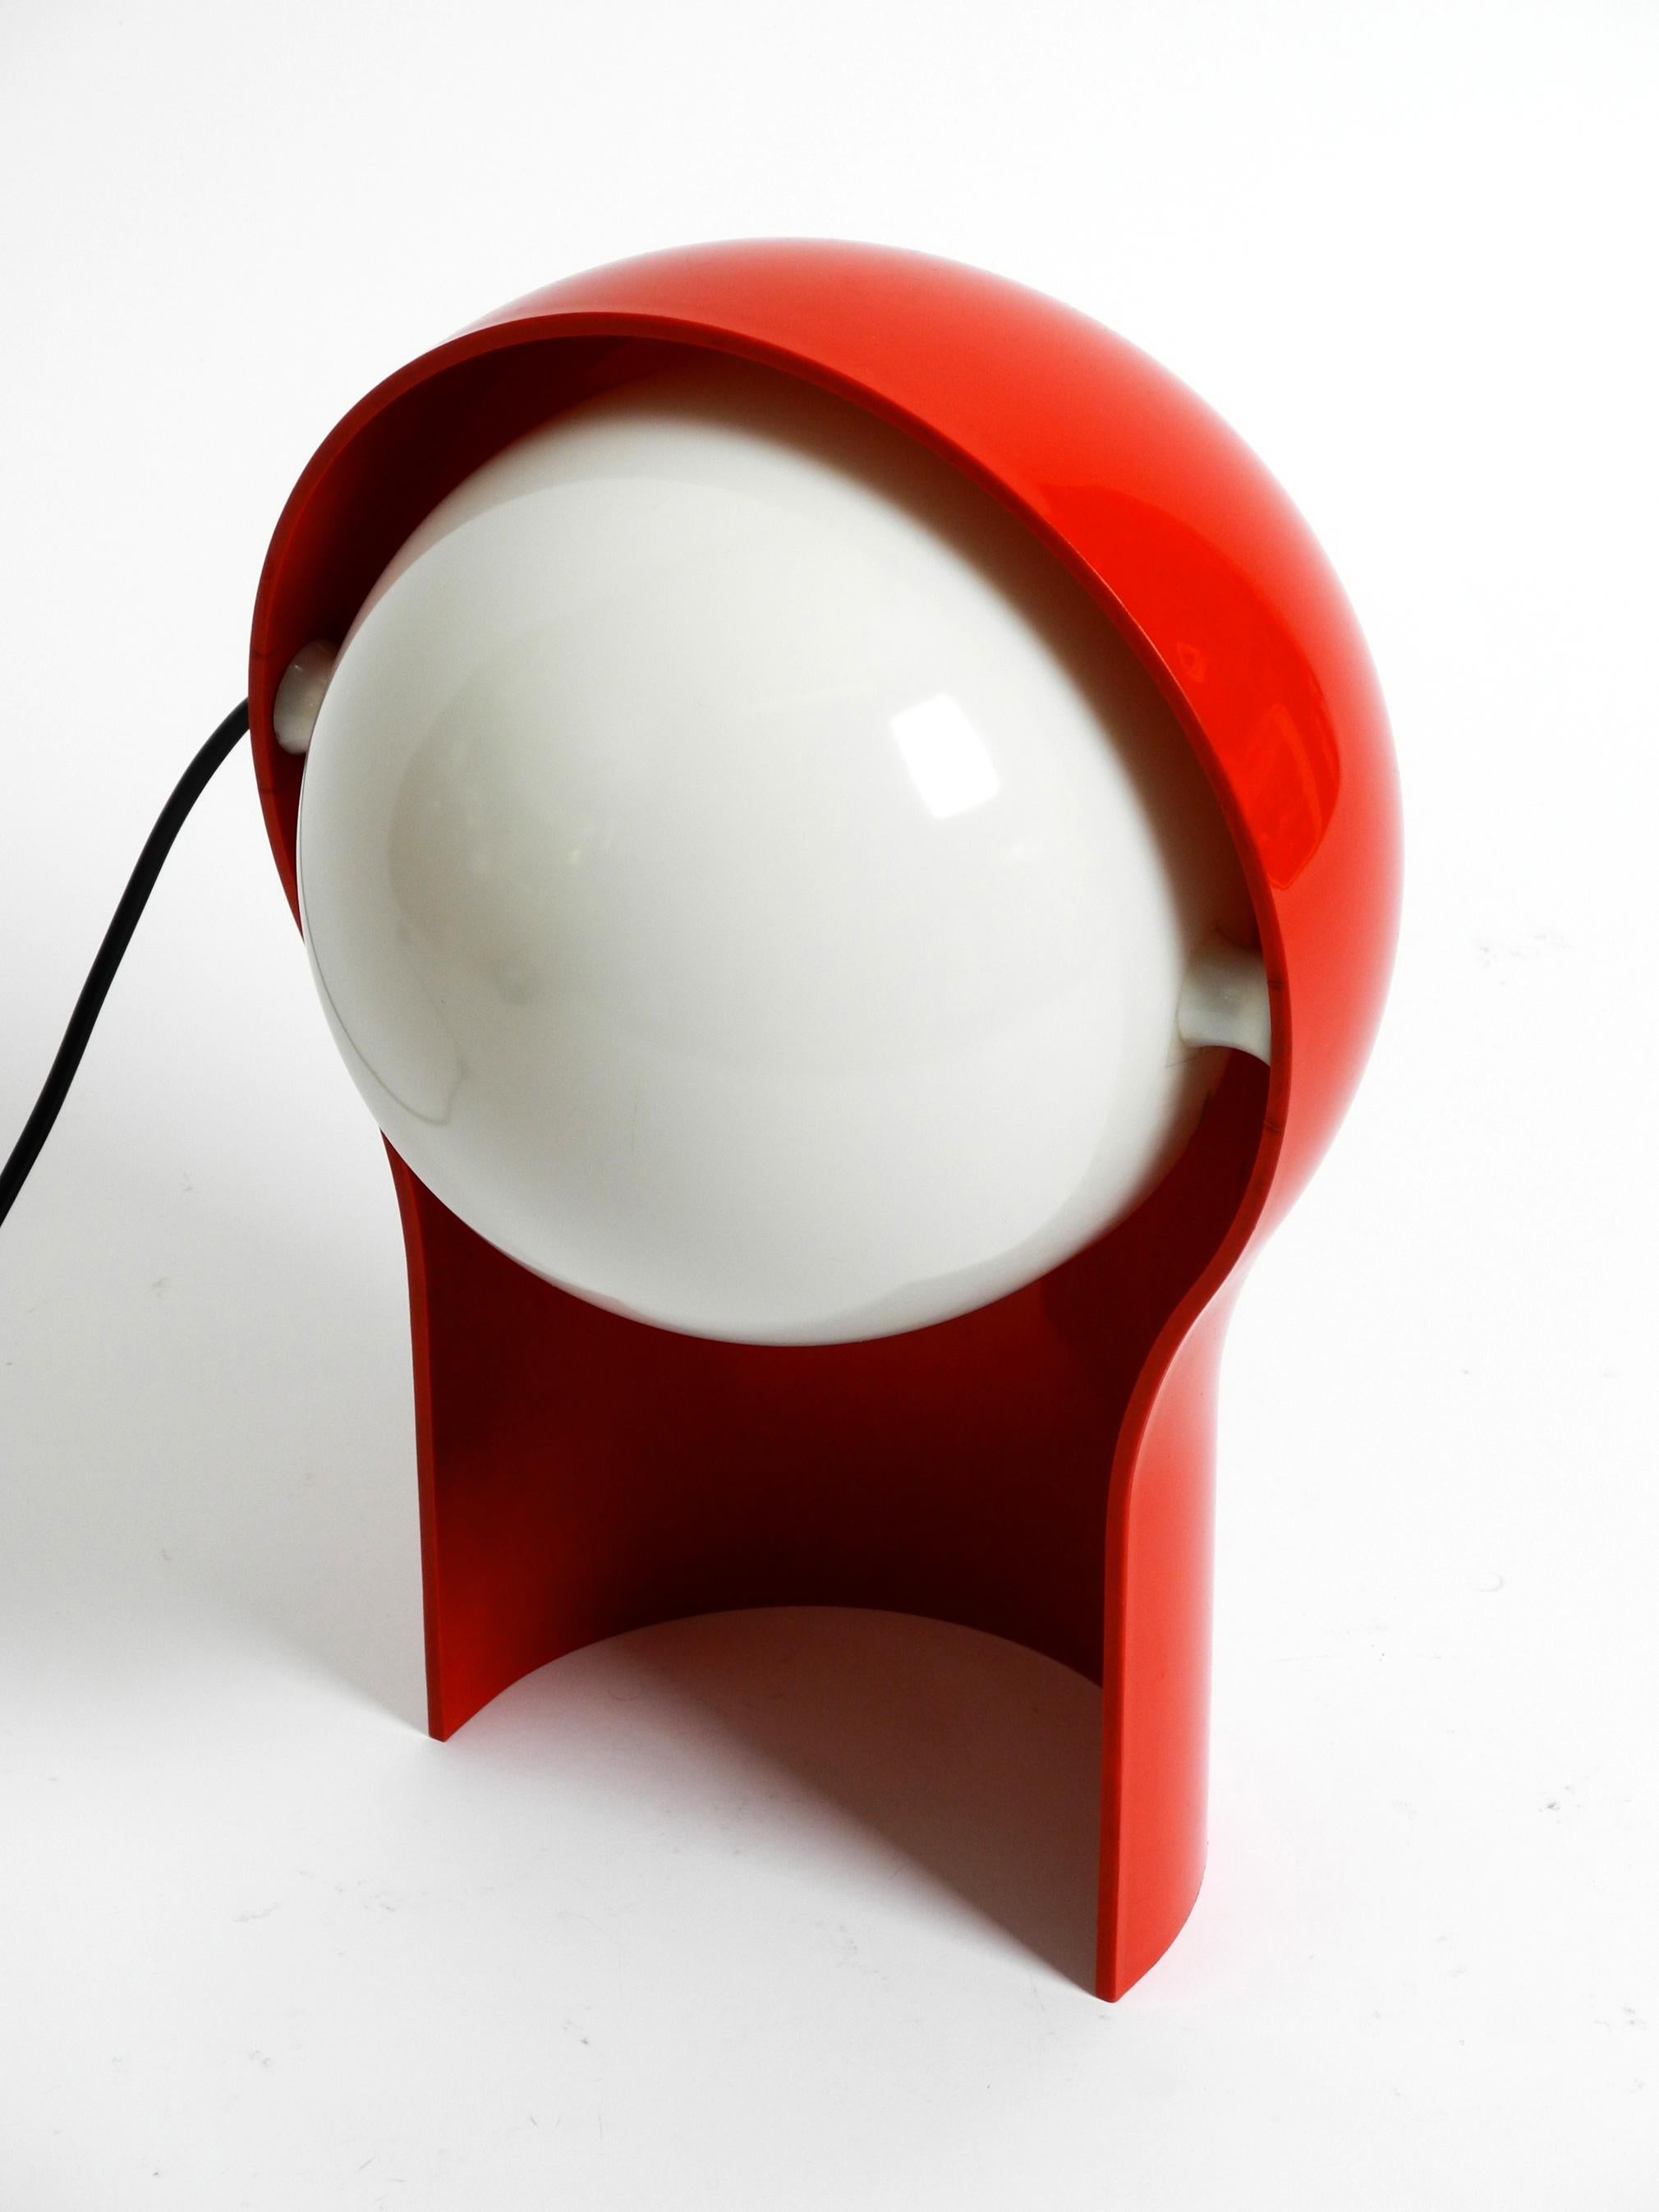 Telegono Table Lamp by Vico Magistretti for Artemide 1968 in Very Good Condition For Sale 5